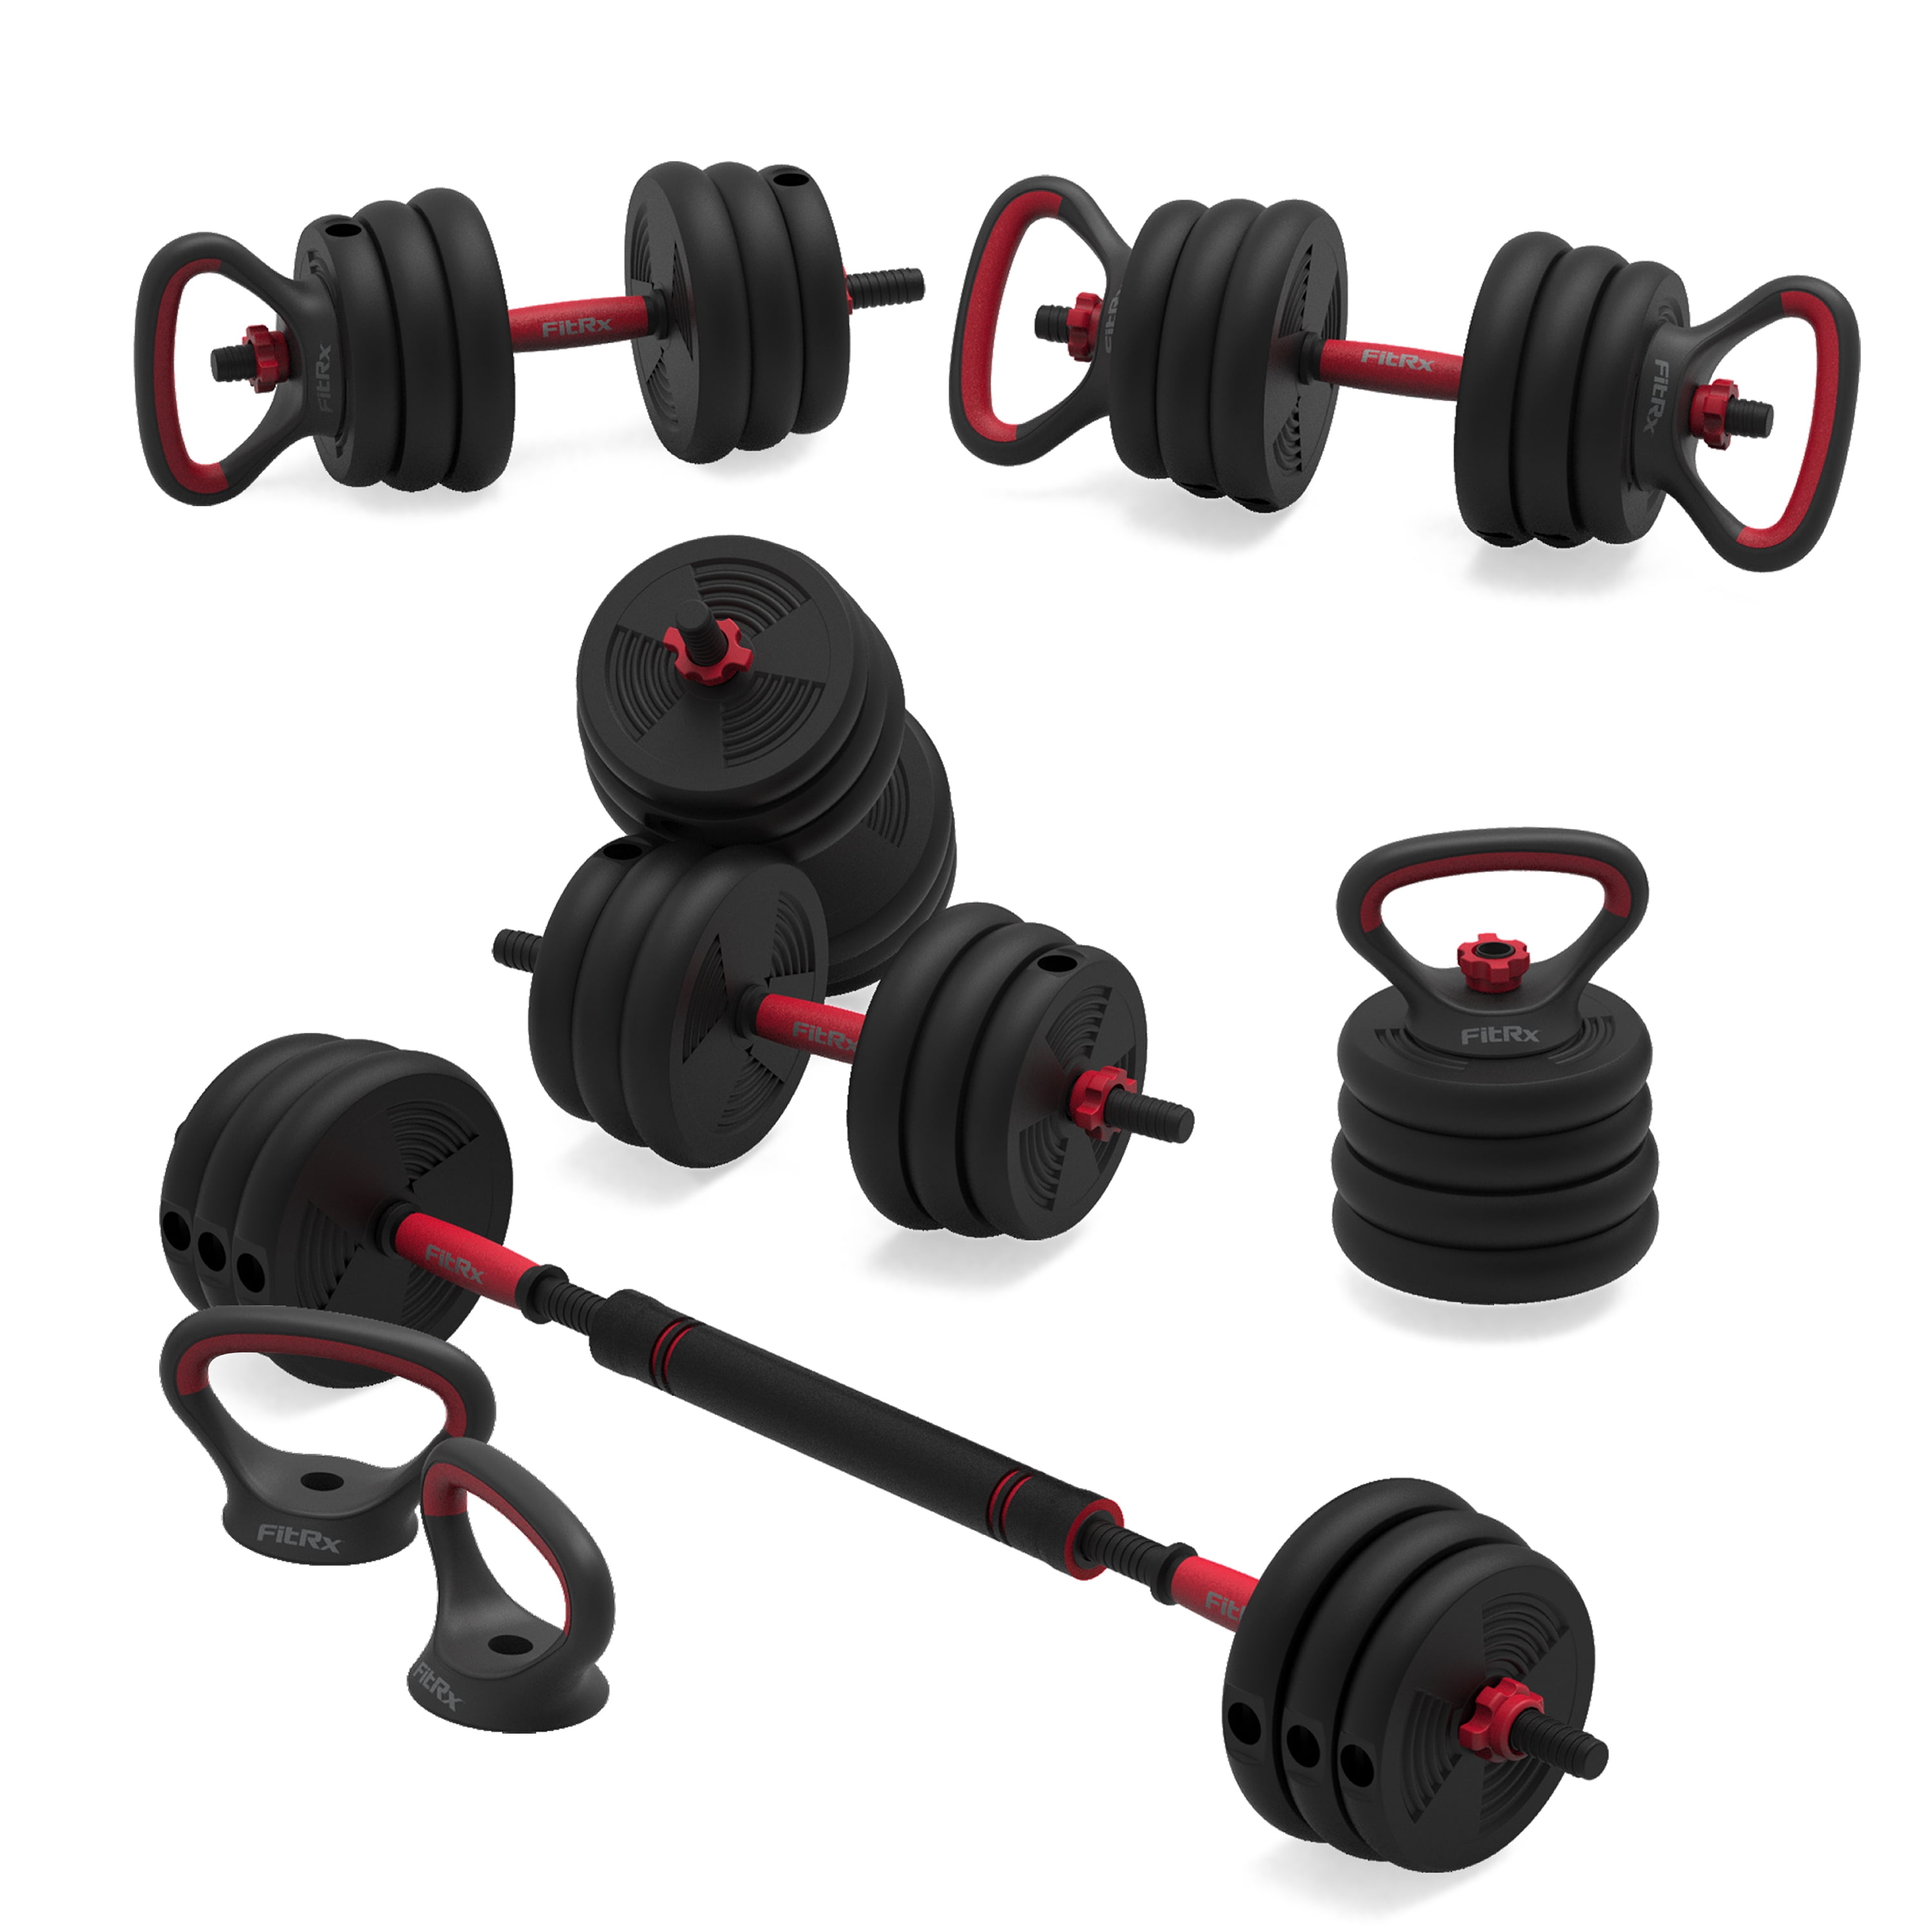 H&N Fashion Adjustable 44LB Dumbbell Weight Set Barbell Lifting 4 Spinlock Collars & 2 Connector Options for Gym Home Bodybuilding Training